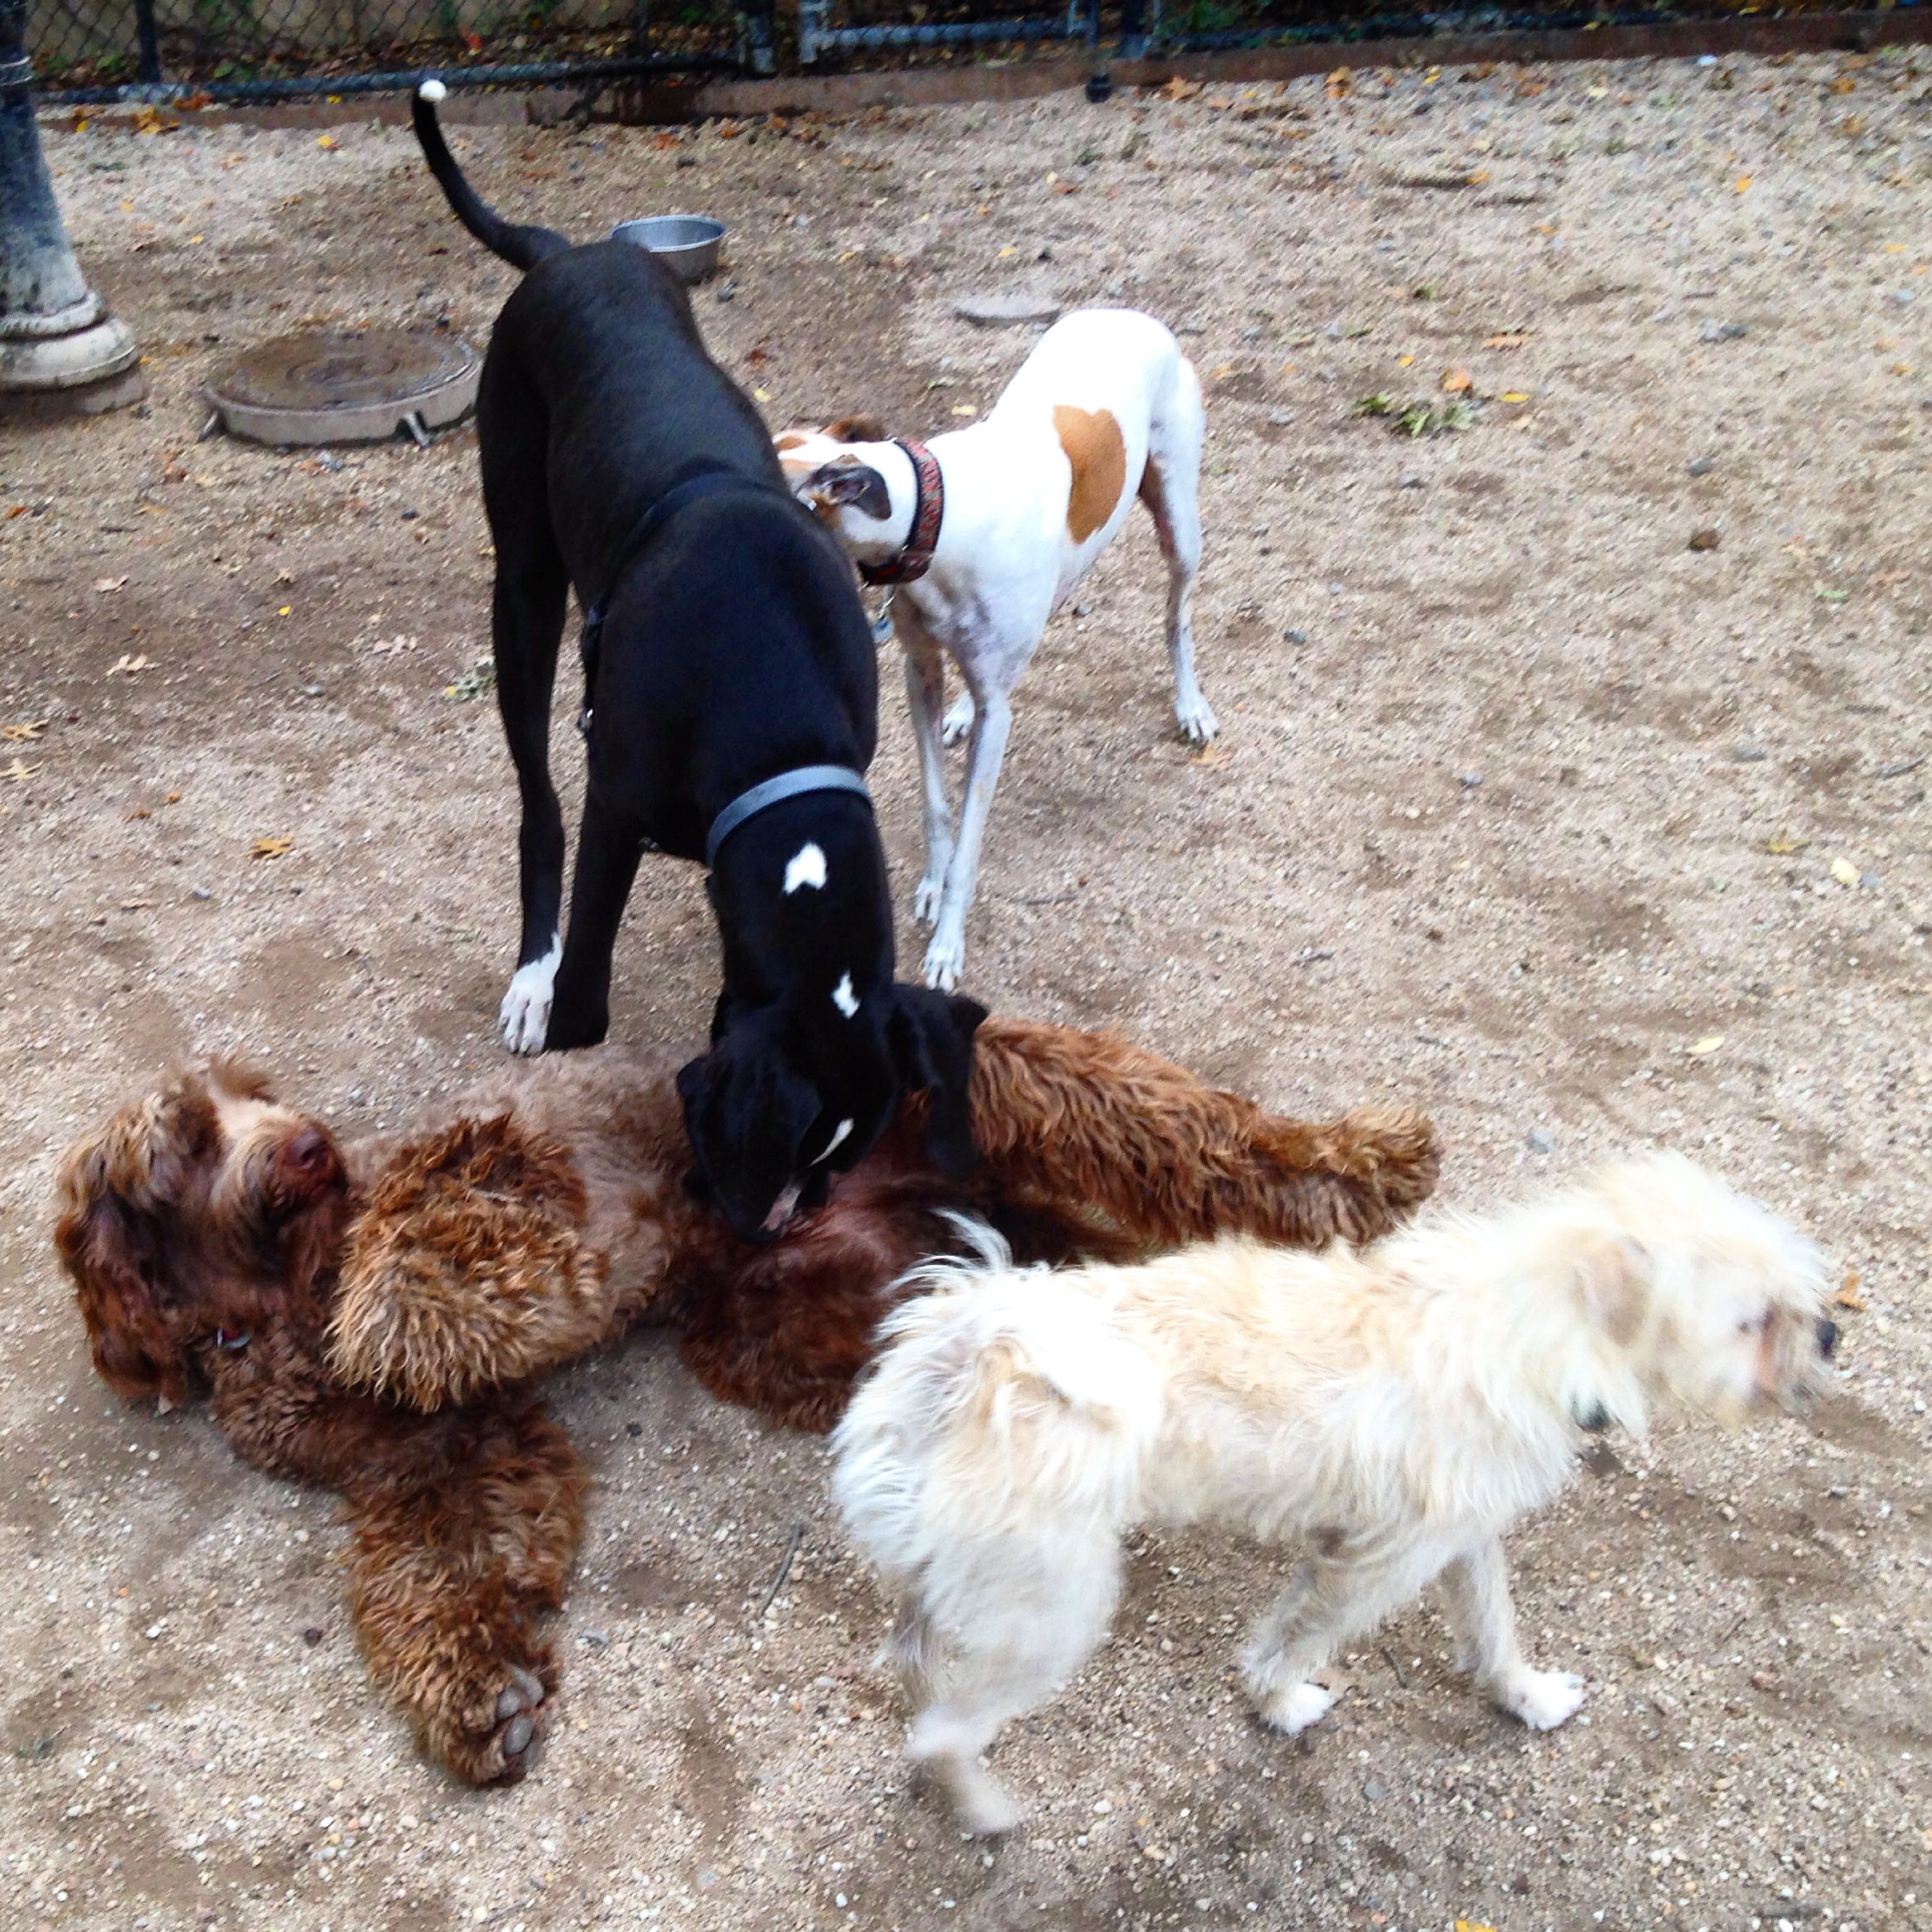 Four dogs sniffing each other in a dog park